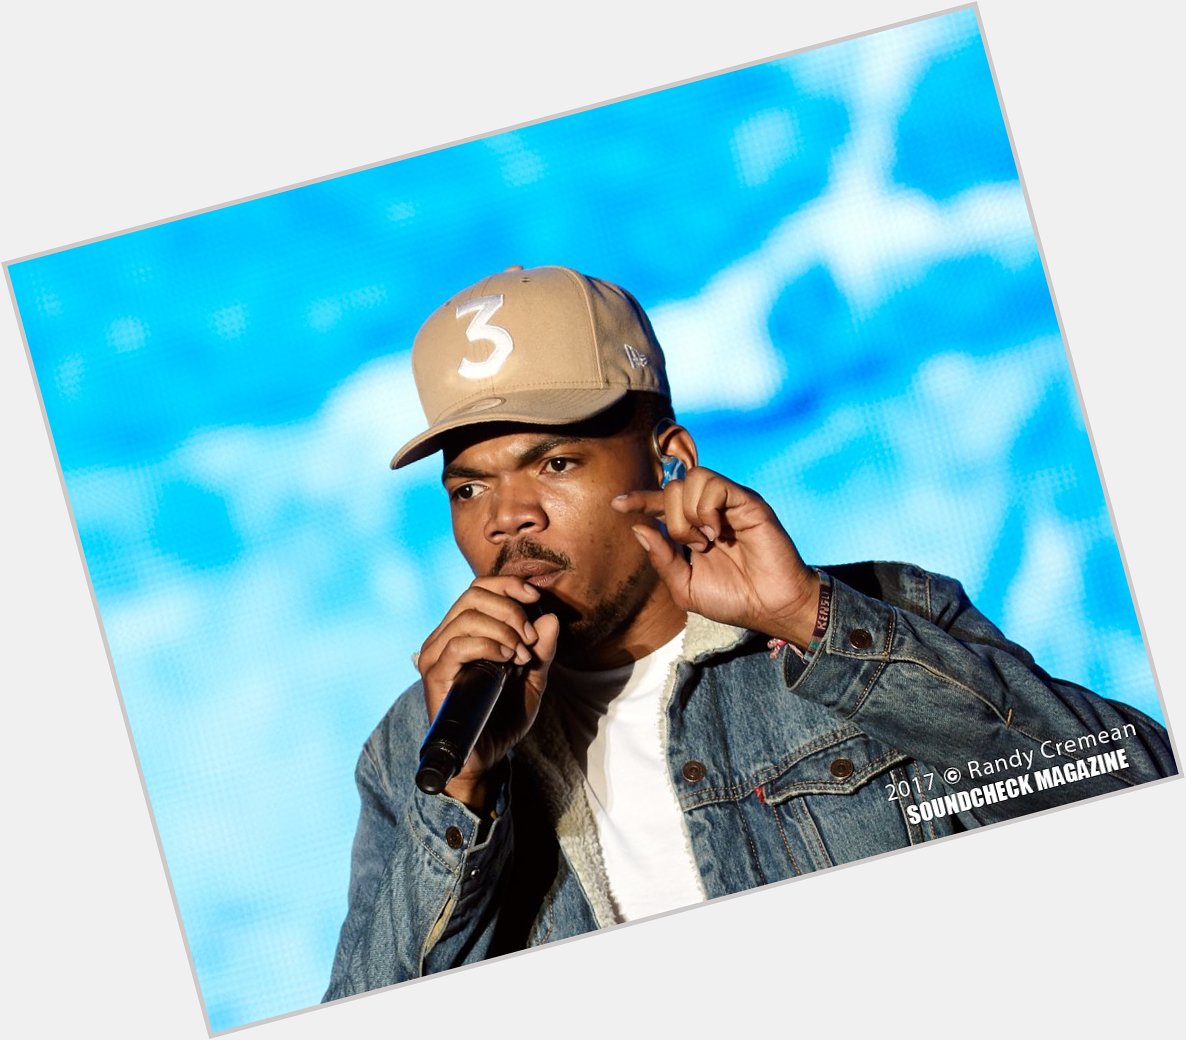 Wishing a very Happy Birthday to Chance the Rapper! (photos from 2017) 